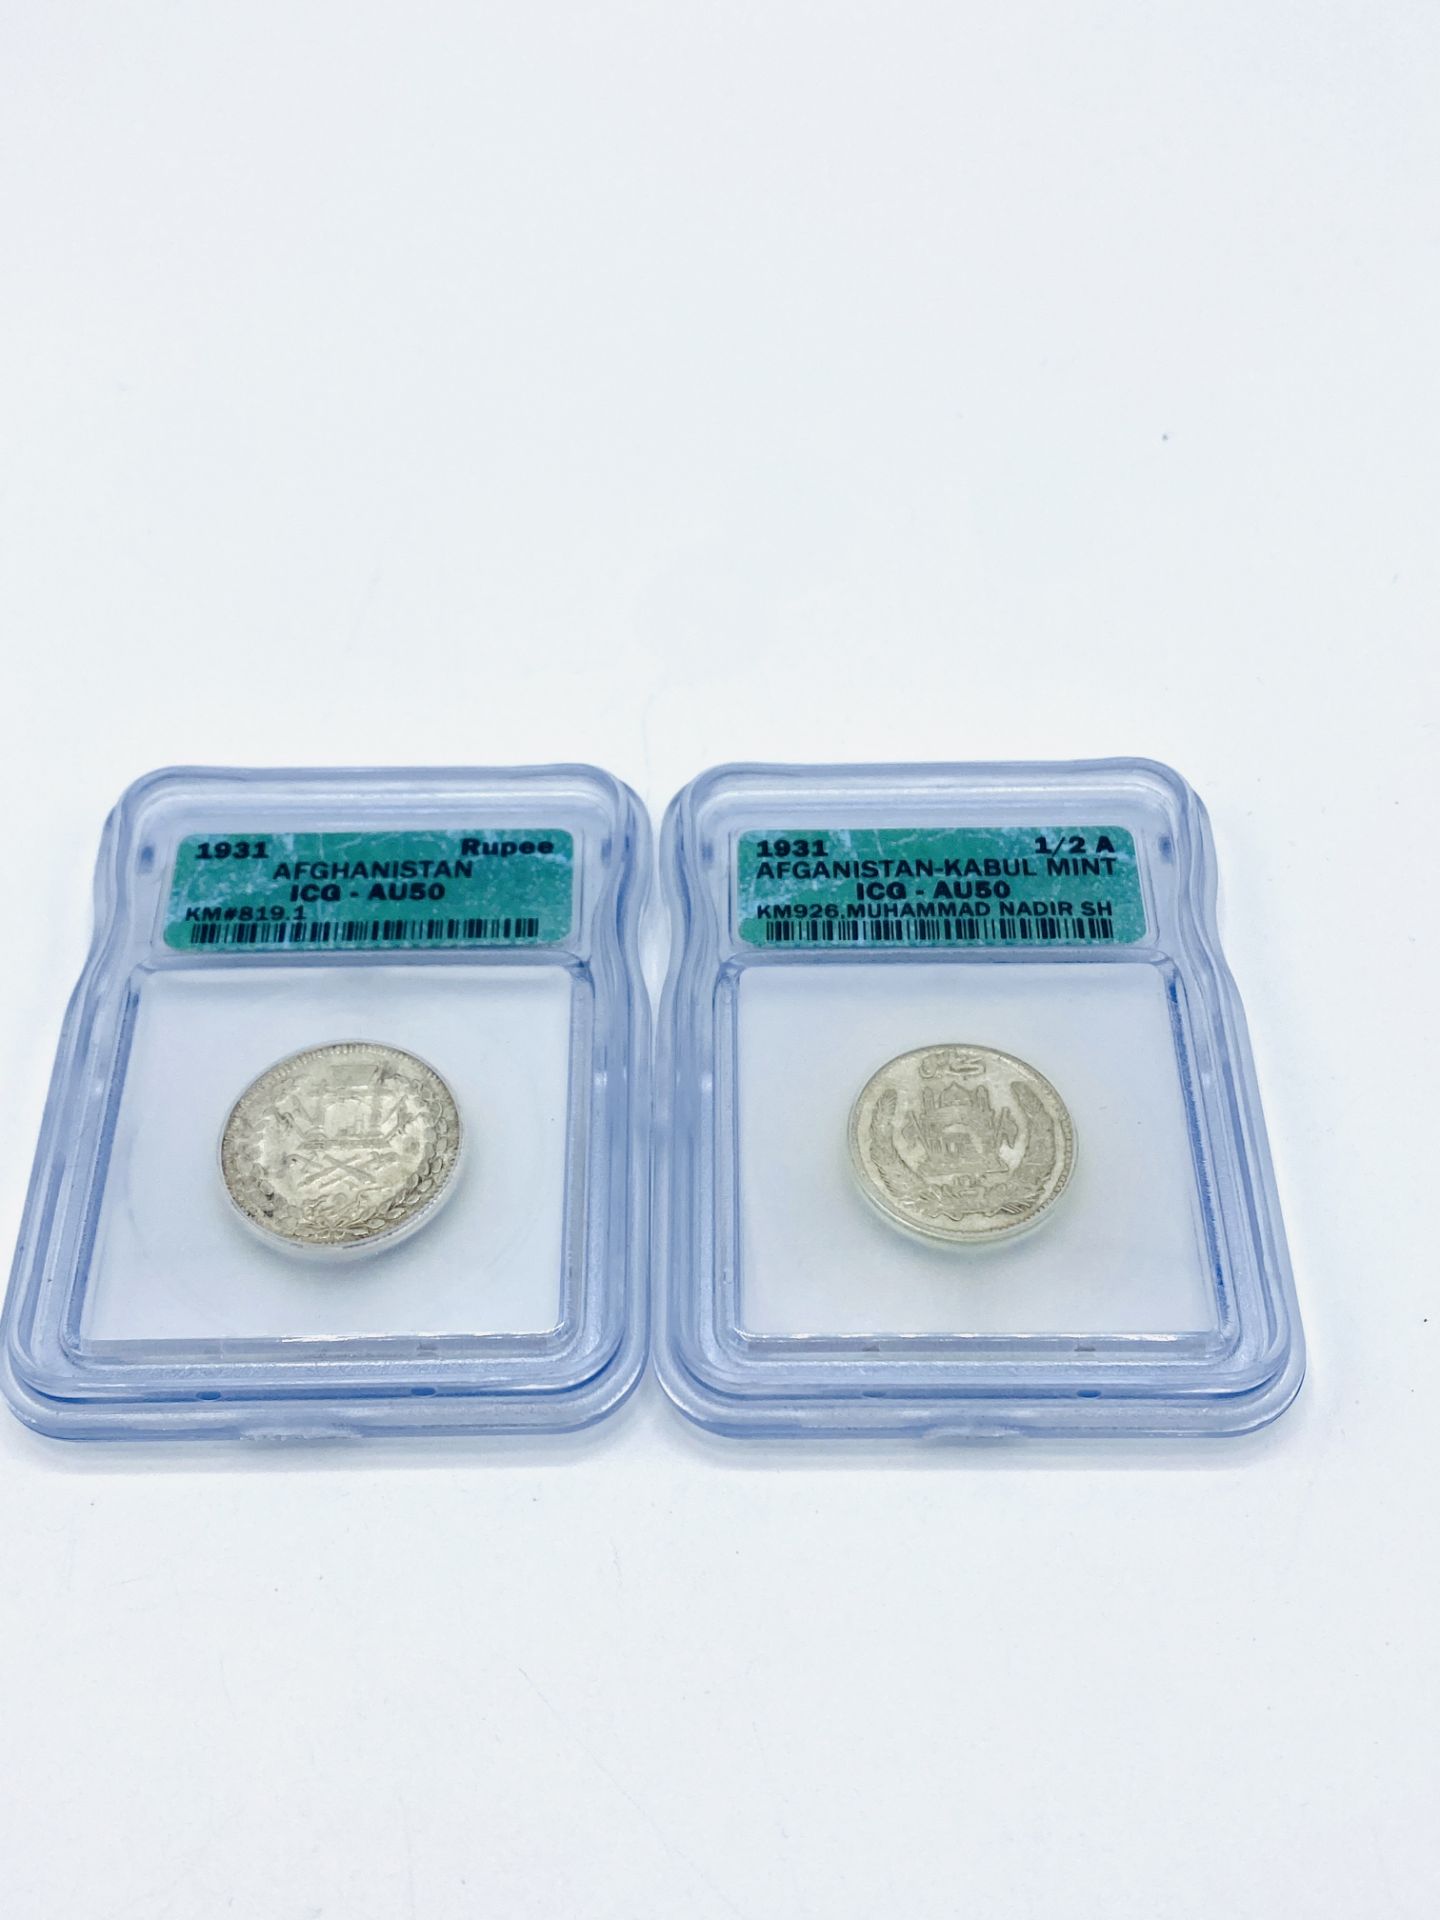 Two 1931 Afghanistan coins